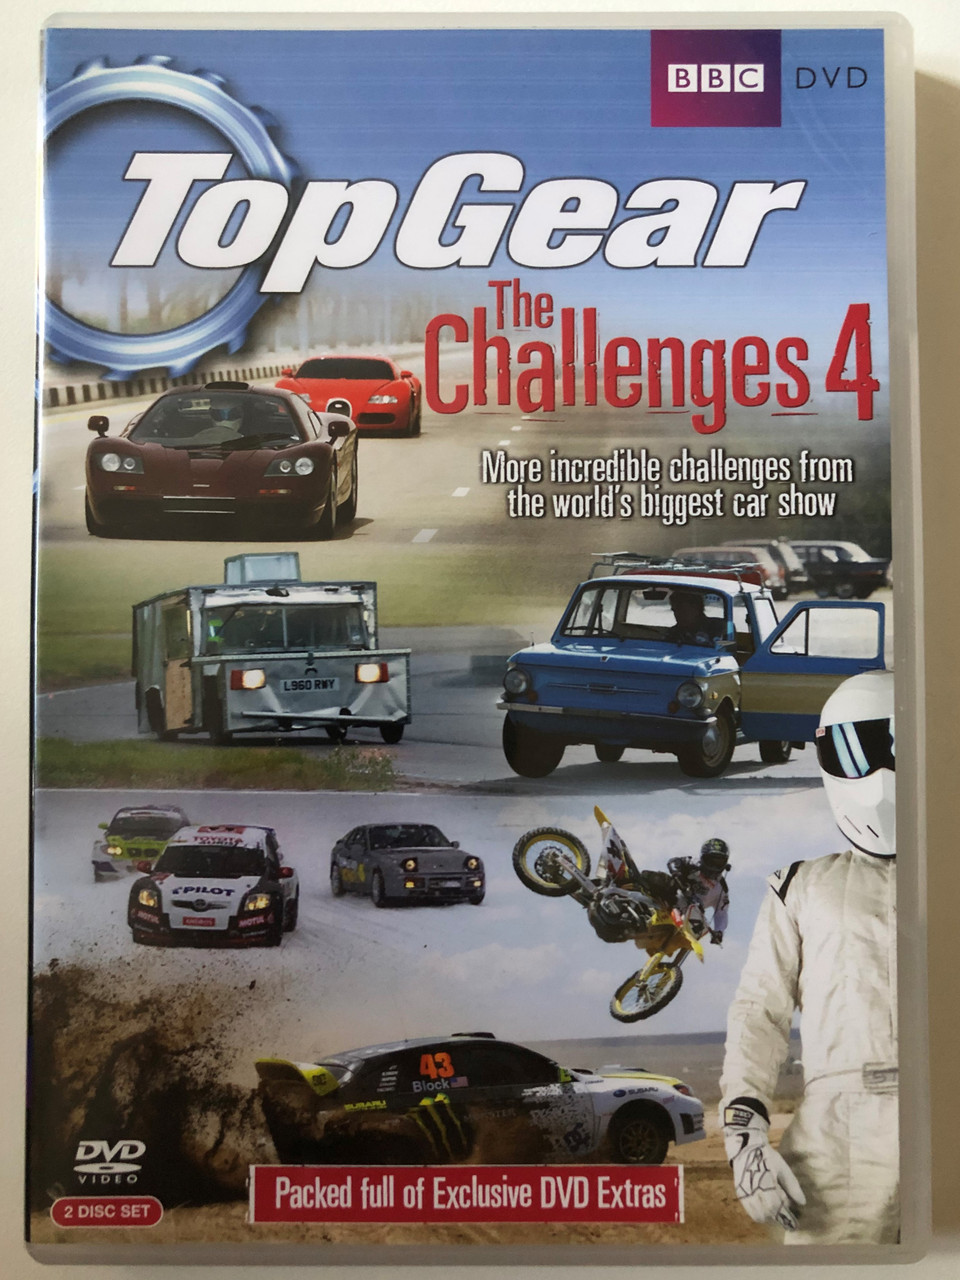 https://cdn10.bigcommerce.com/s-62bdpkt7pb/products/0/images/258888/Top_Gear_The_Challenges_4_More_incredible_challenges_from_the_worlds_biggest_car_show_Packed_full_of_Exclusive_DVD_Extras_BBC_2x_DVD_Video_CD_2010_BBCDVD3193_1__85529.1668669740.1280.1280.JPG?c=2&_gl=1*t4zto2*_ga*MjA2NTIxMjE2MC4xNTkwNTEyNTMy*_ga_WS2VZYPC6G*MTY2ODY2NzE5OC42MzEuMS4xNjY4NjY5NDgwLjI3LjAuMA..